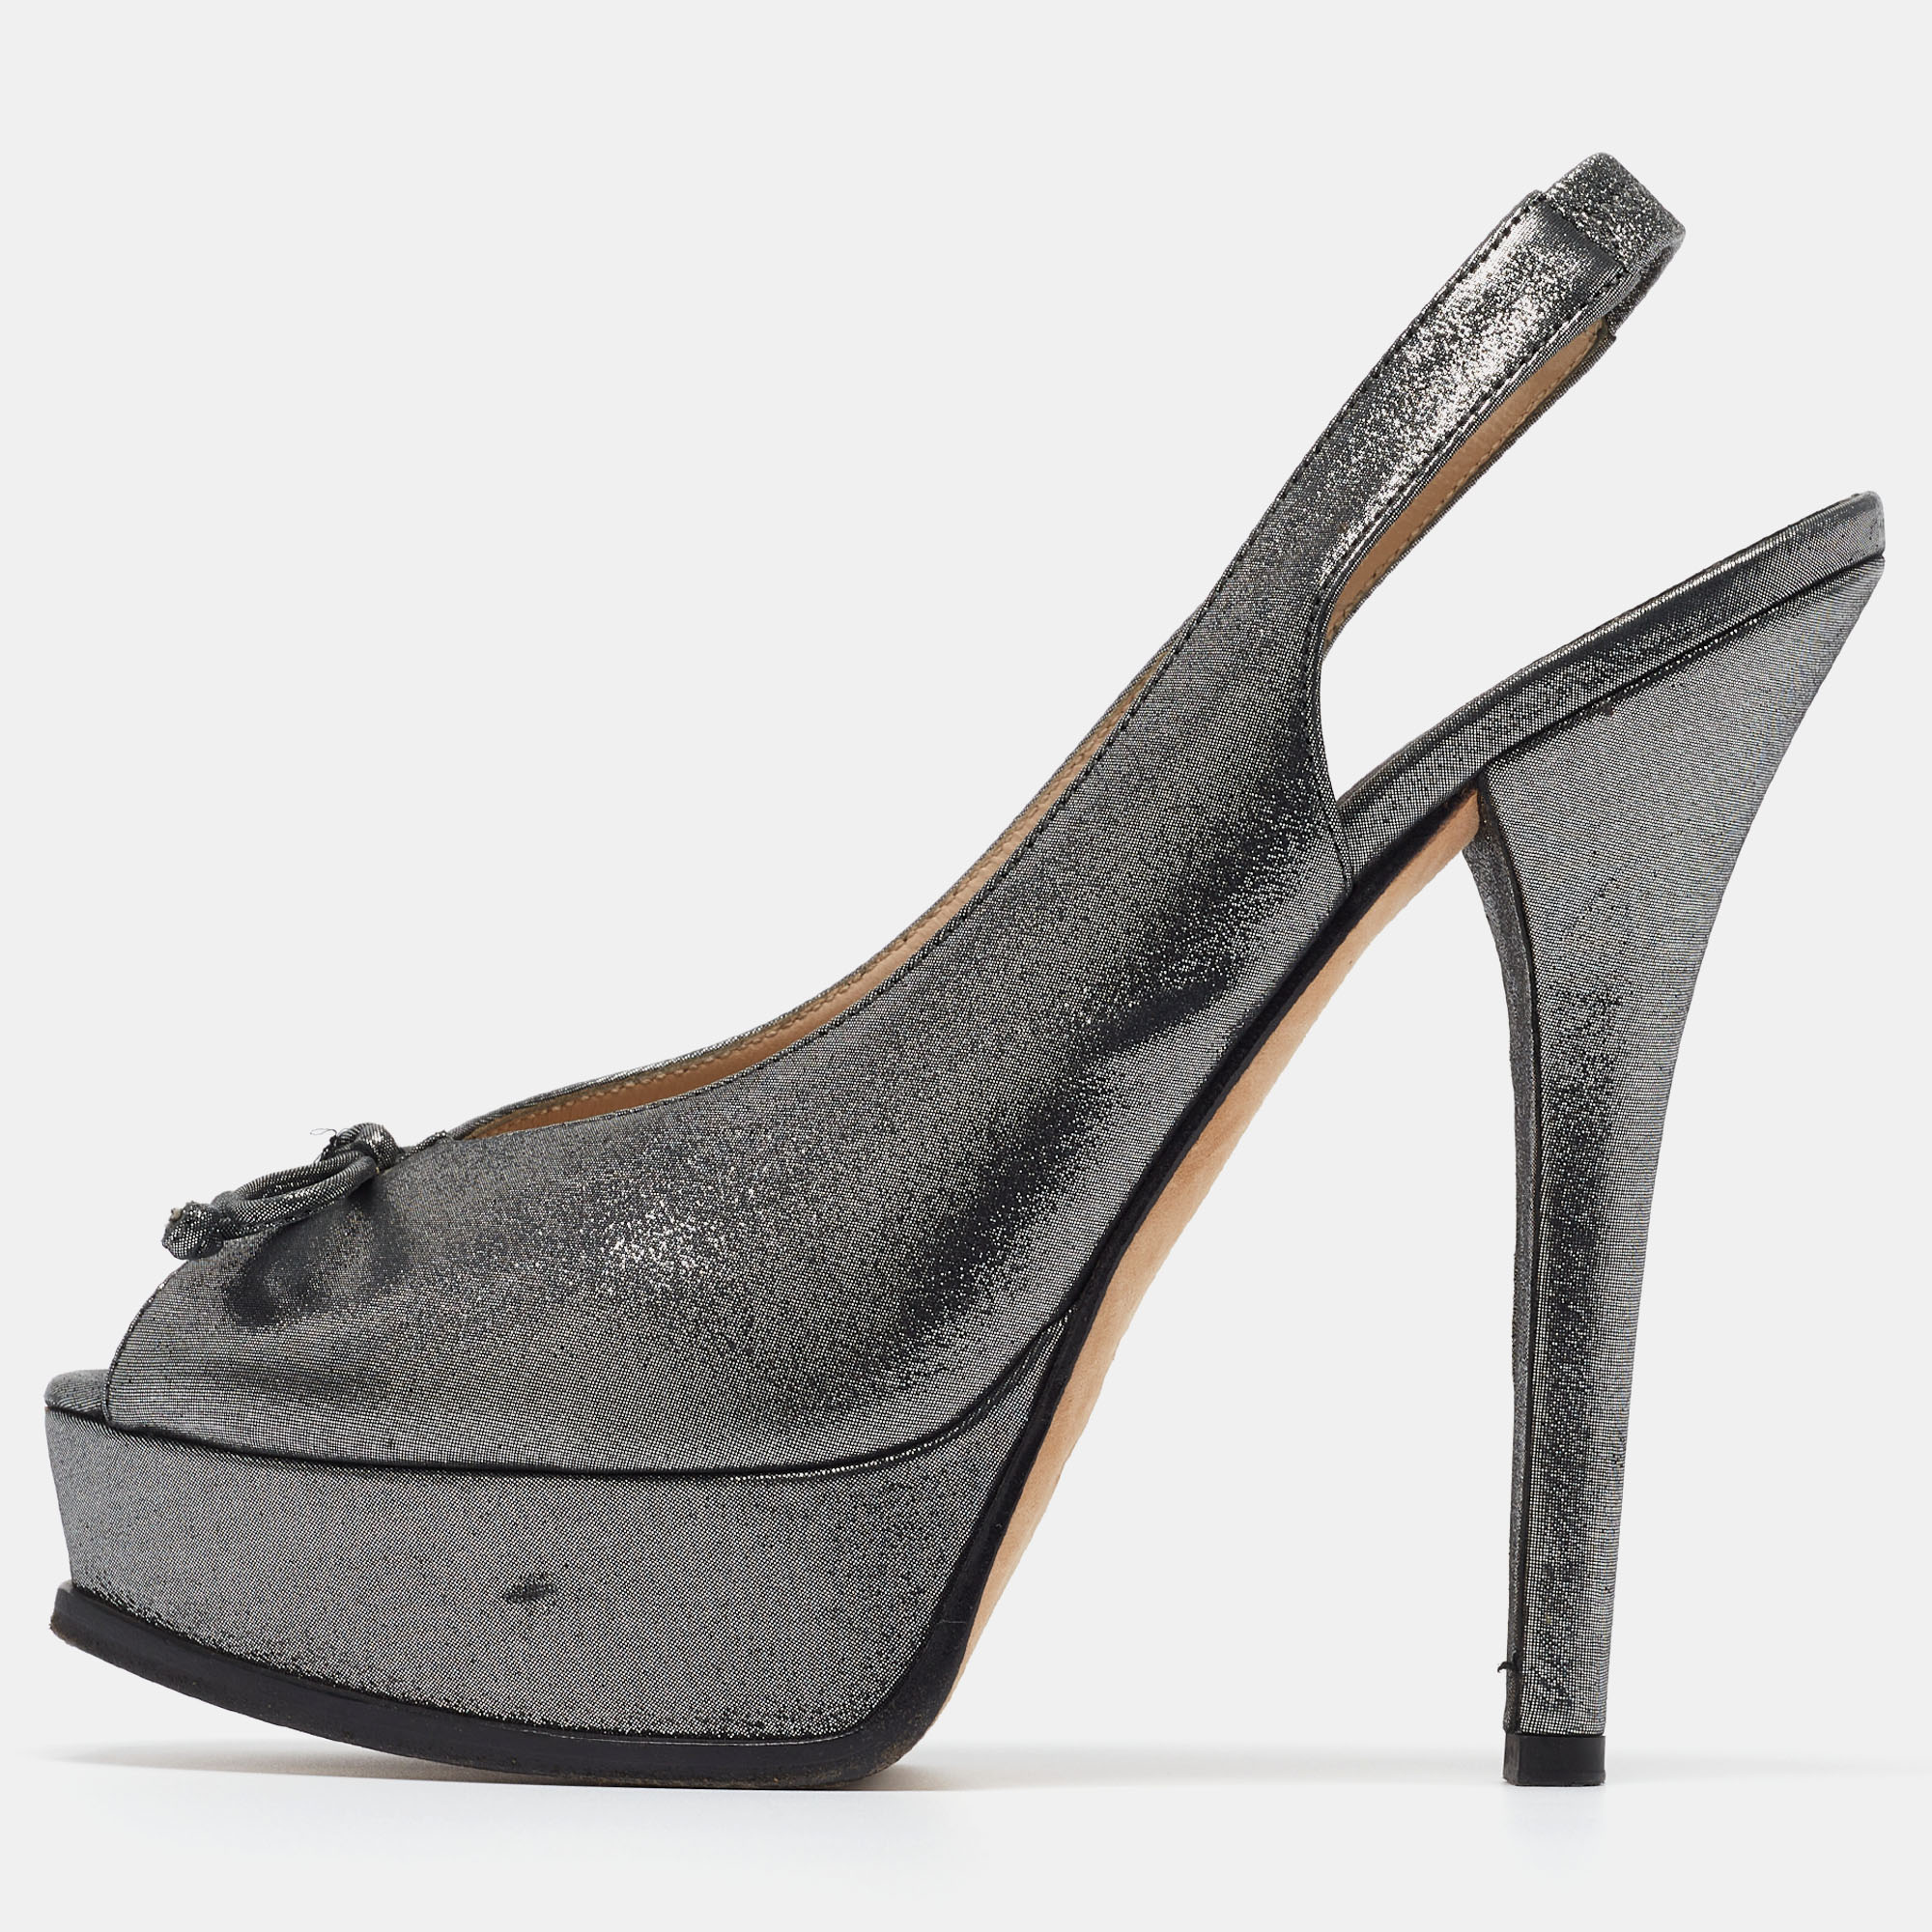 This pair of Fendi pumps will offer you a confident and chic look. Made from black leather its platforms is equipped with a brand signature on the front and these shoes flaunt 15cm heels along with platforms.